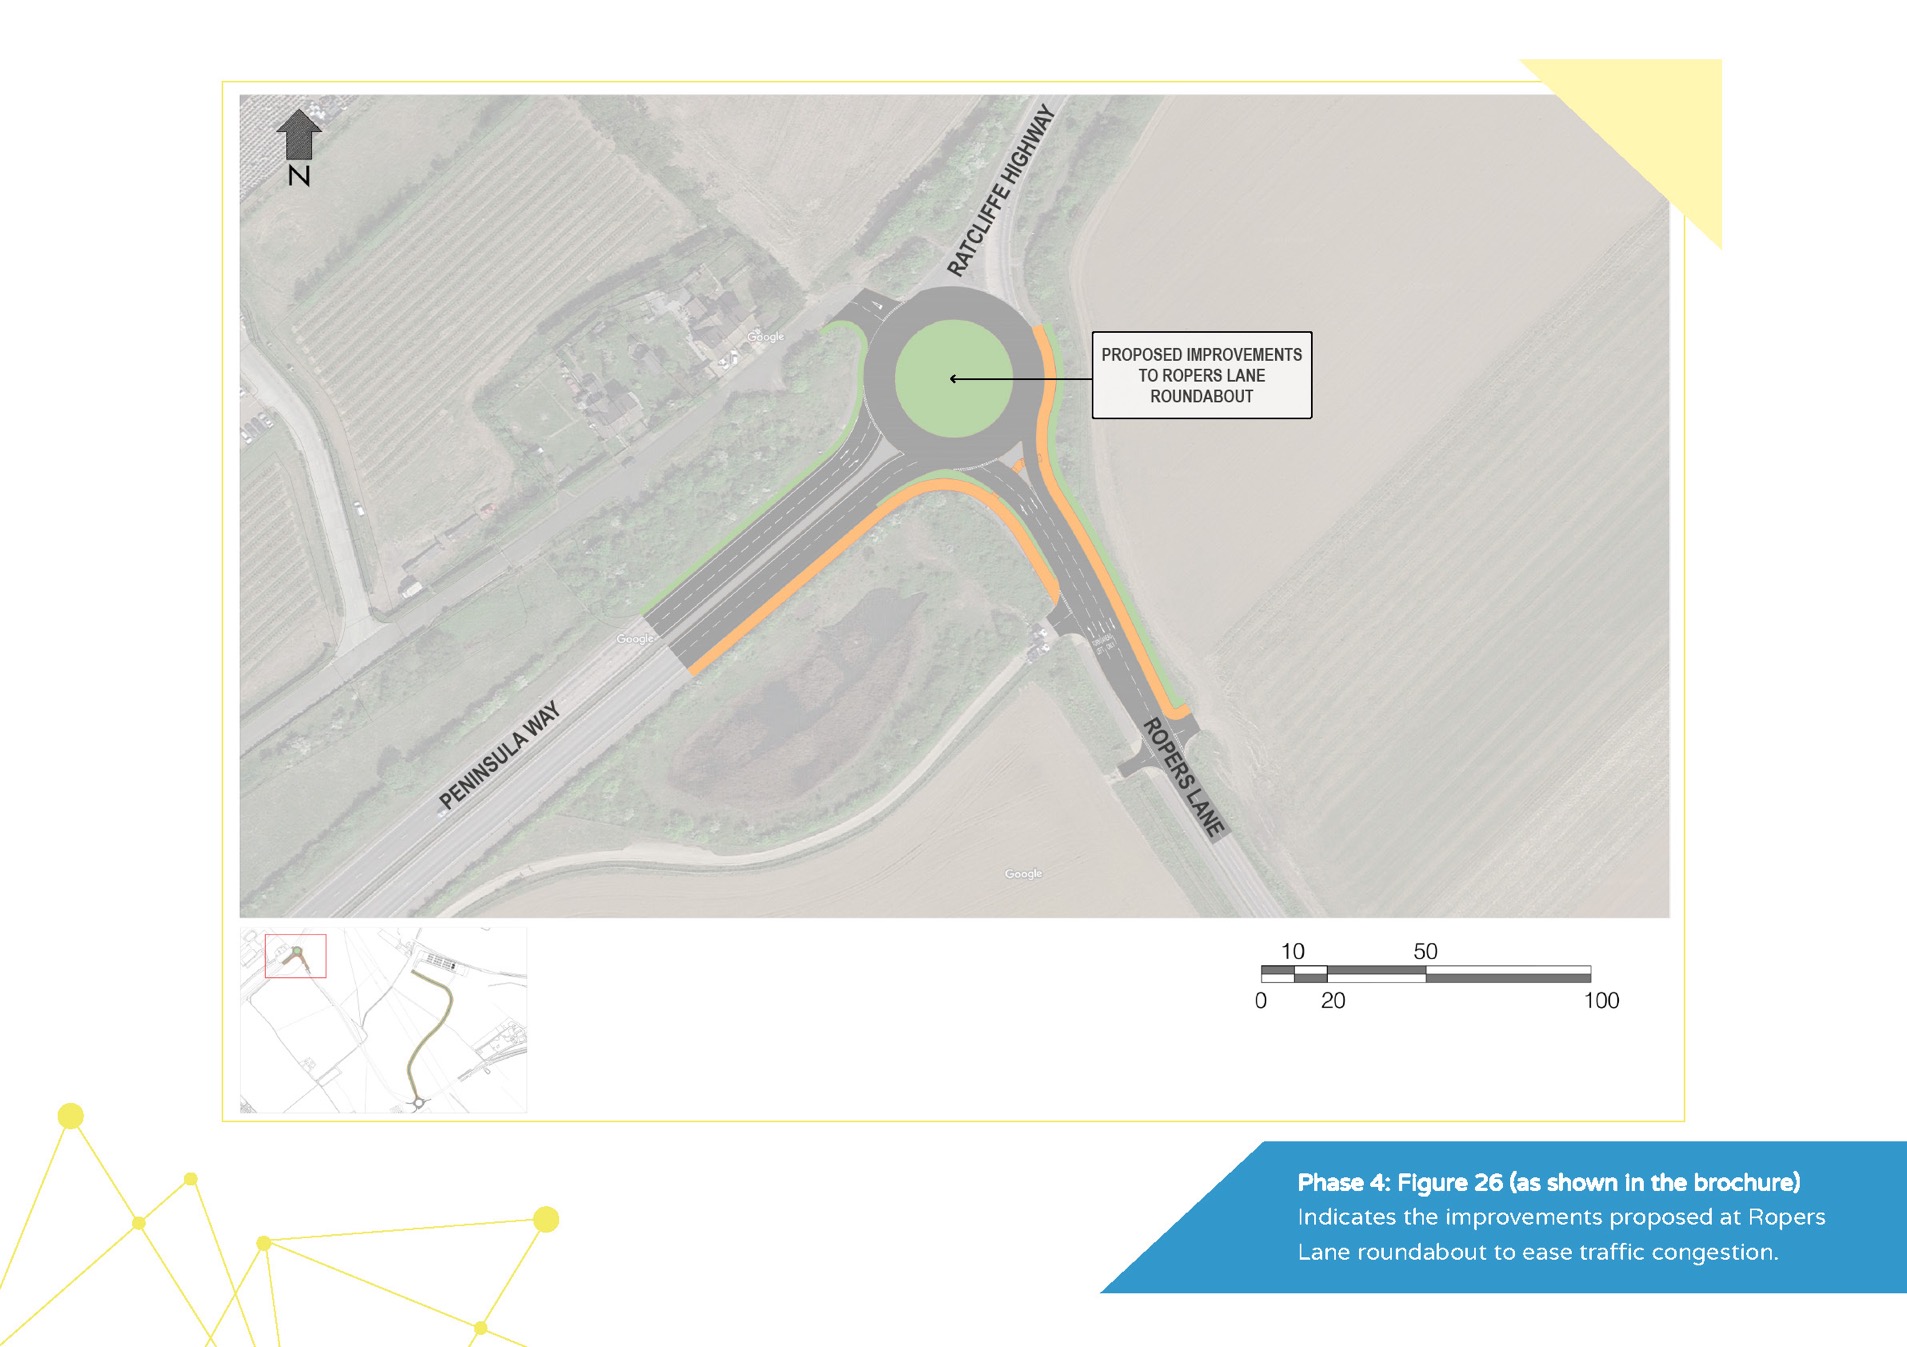 Indicates the improvements proposed at Ropers Lane roundabout to ease traffic congestion